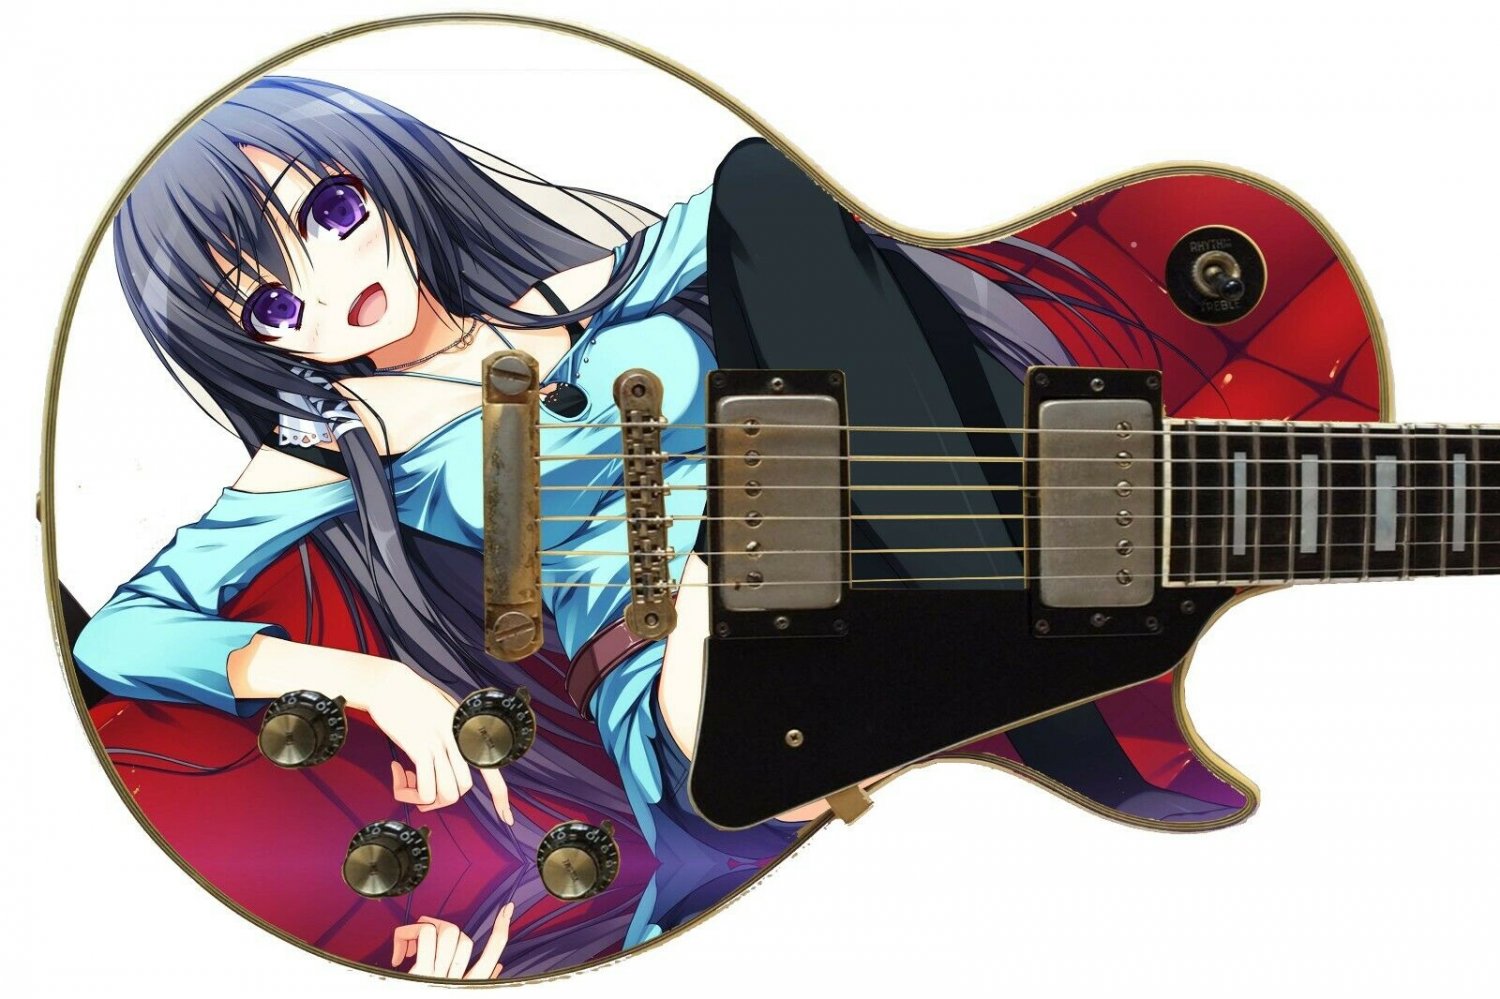 Guitar Skin Axe Wrap Re-skin Sexy Anime Girl sitting on the couch 607